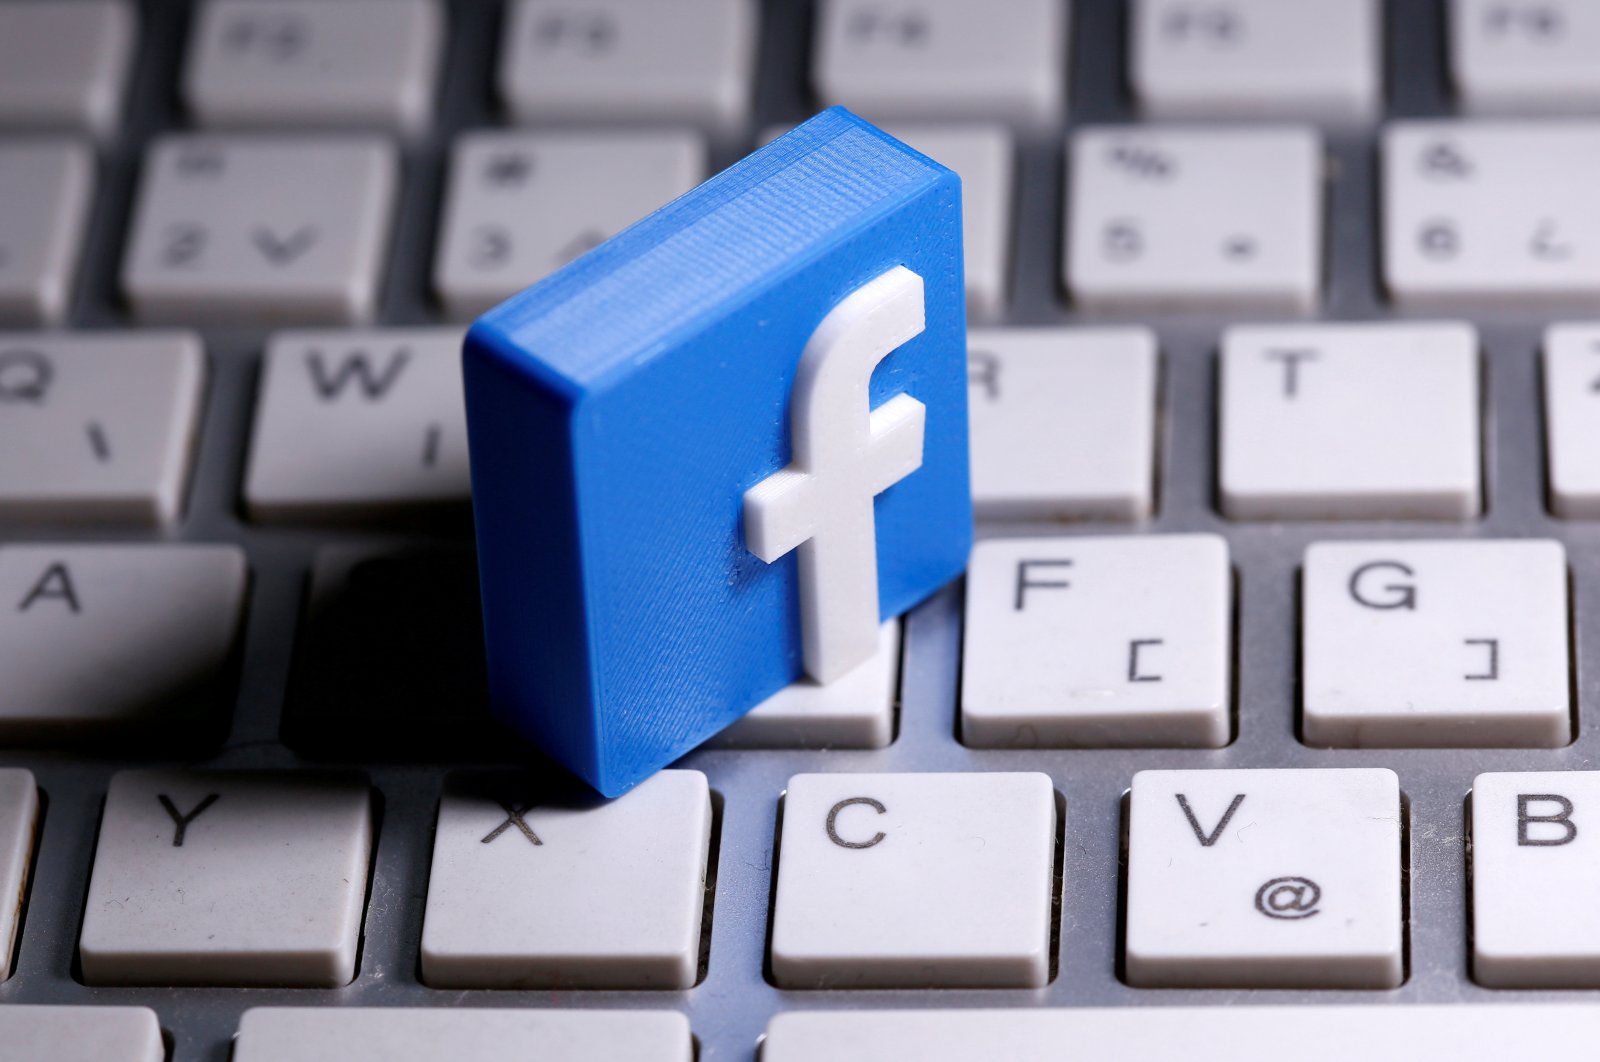 A 3D-printed Facebook logo is seen placed on a keyboard in this illustration taken March 25, 2020. (Reuters Photo)